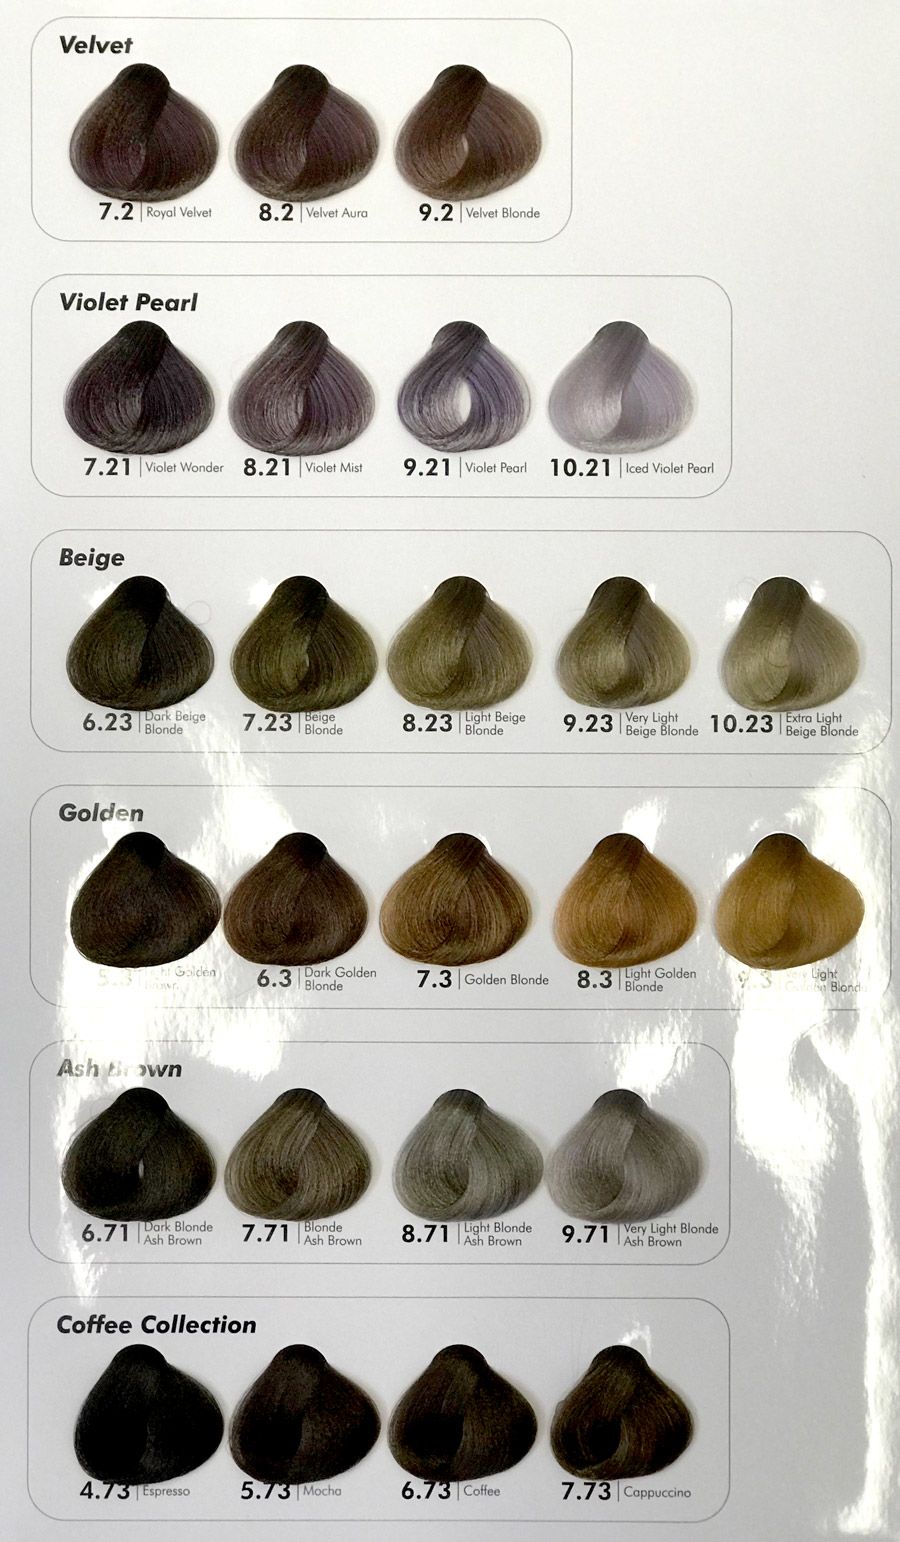 Hair colour chart by Cristalli featuring velvet, violet, beige, golden, ash brown and coffee collection.